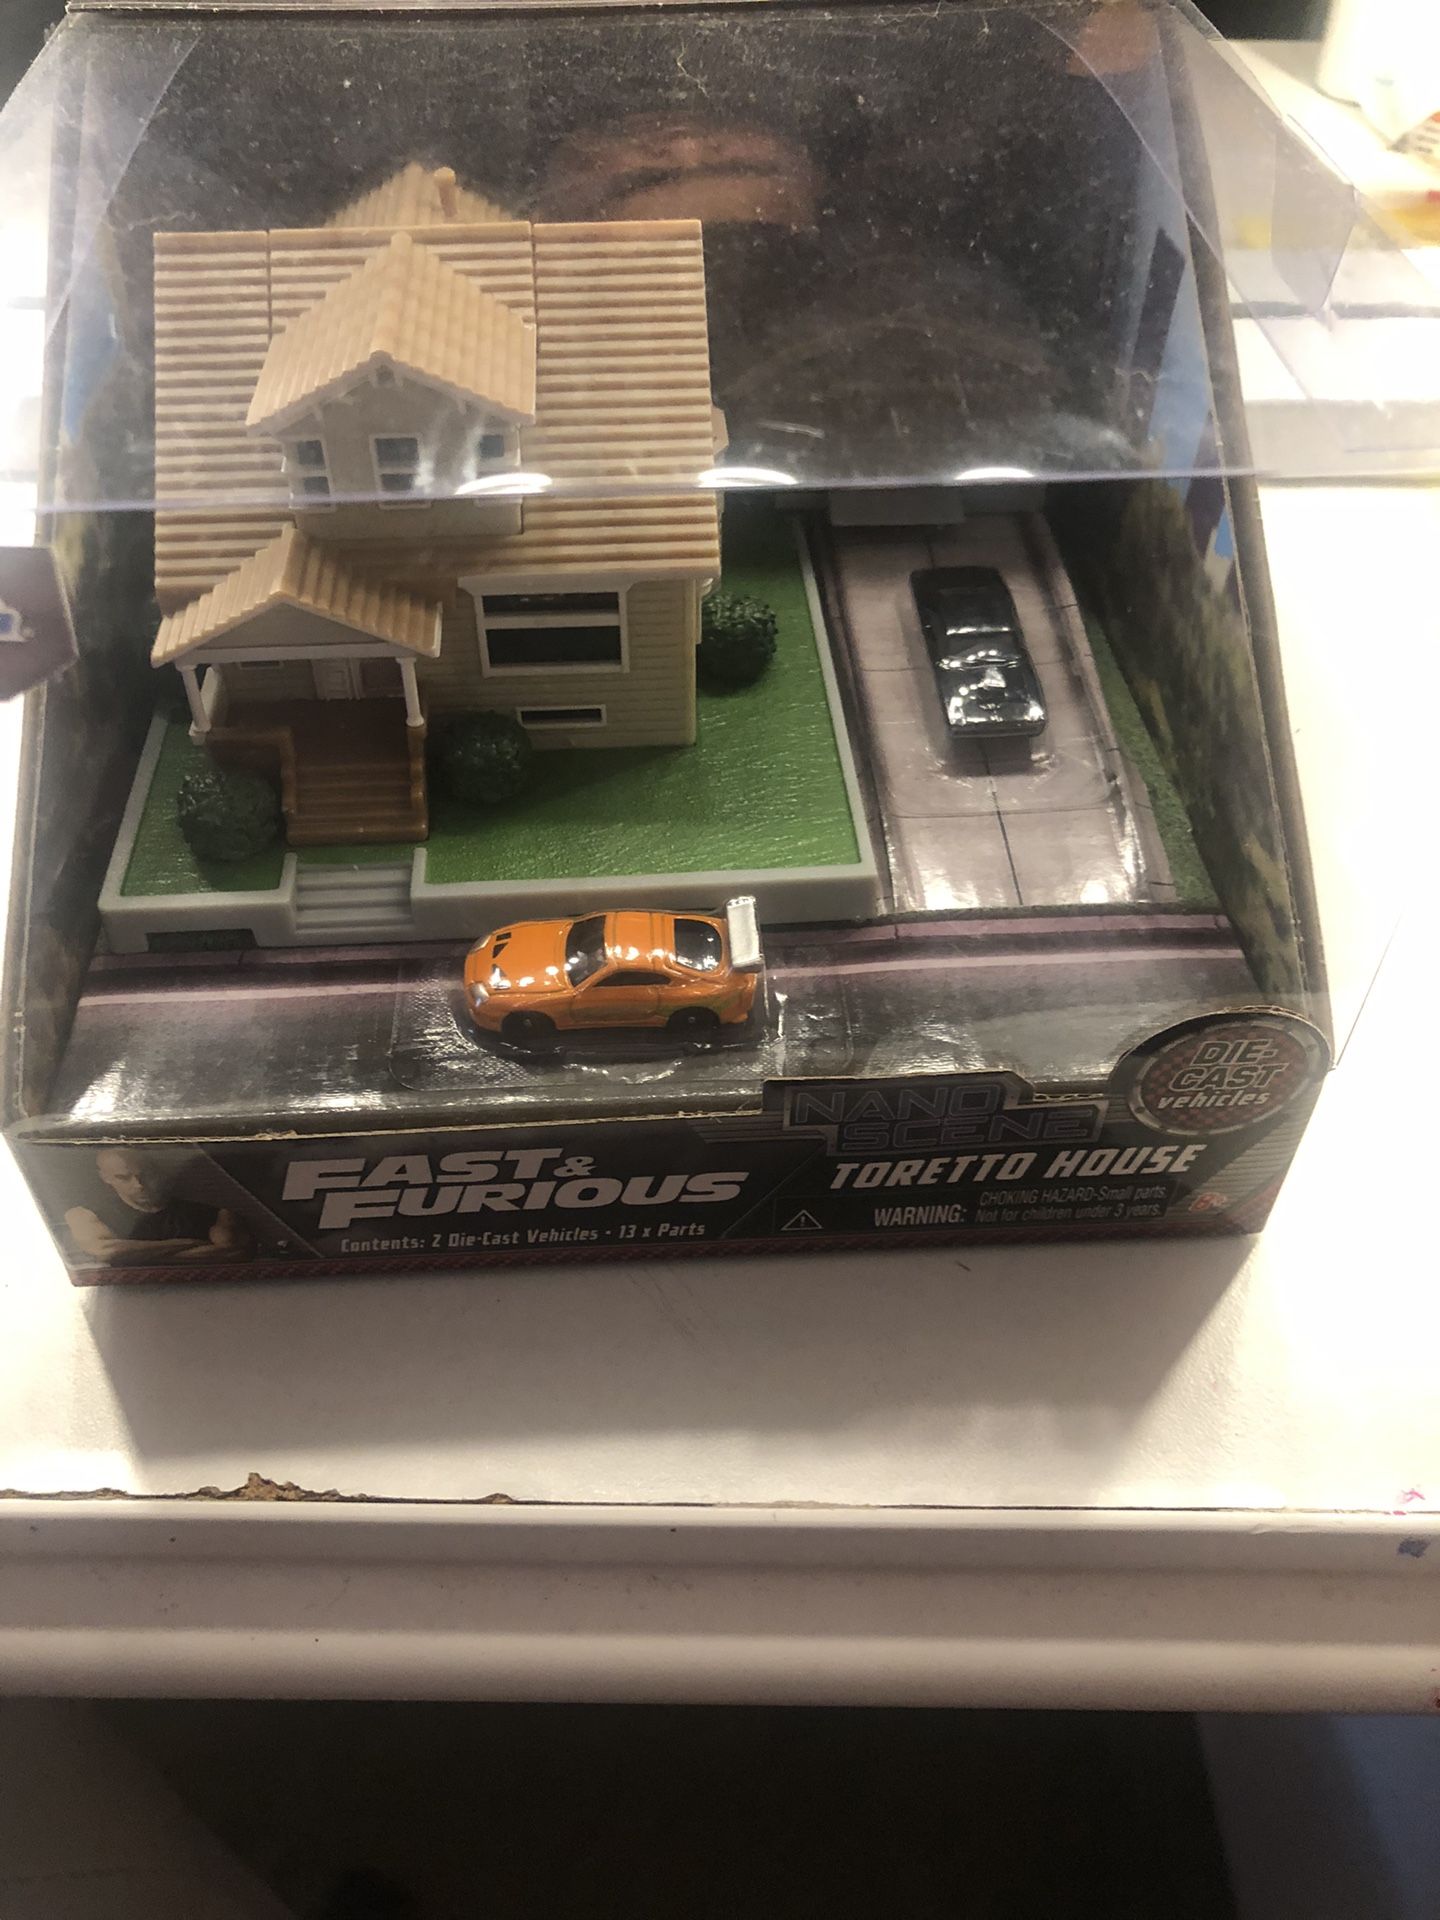 Fast & Furious Toy